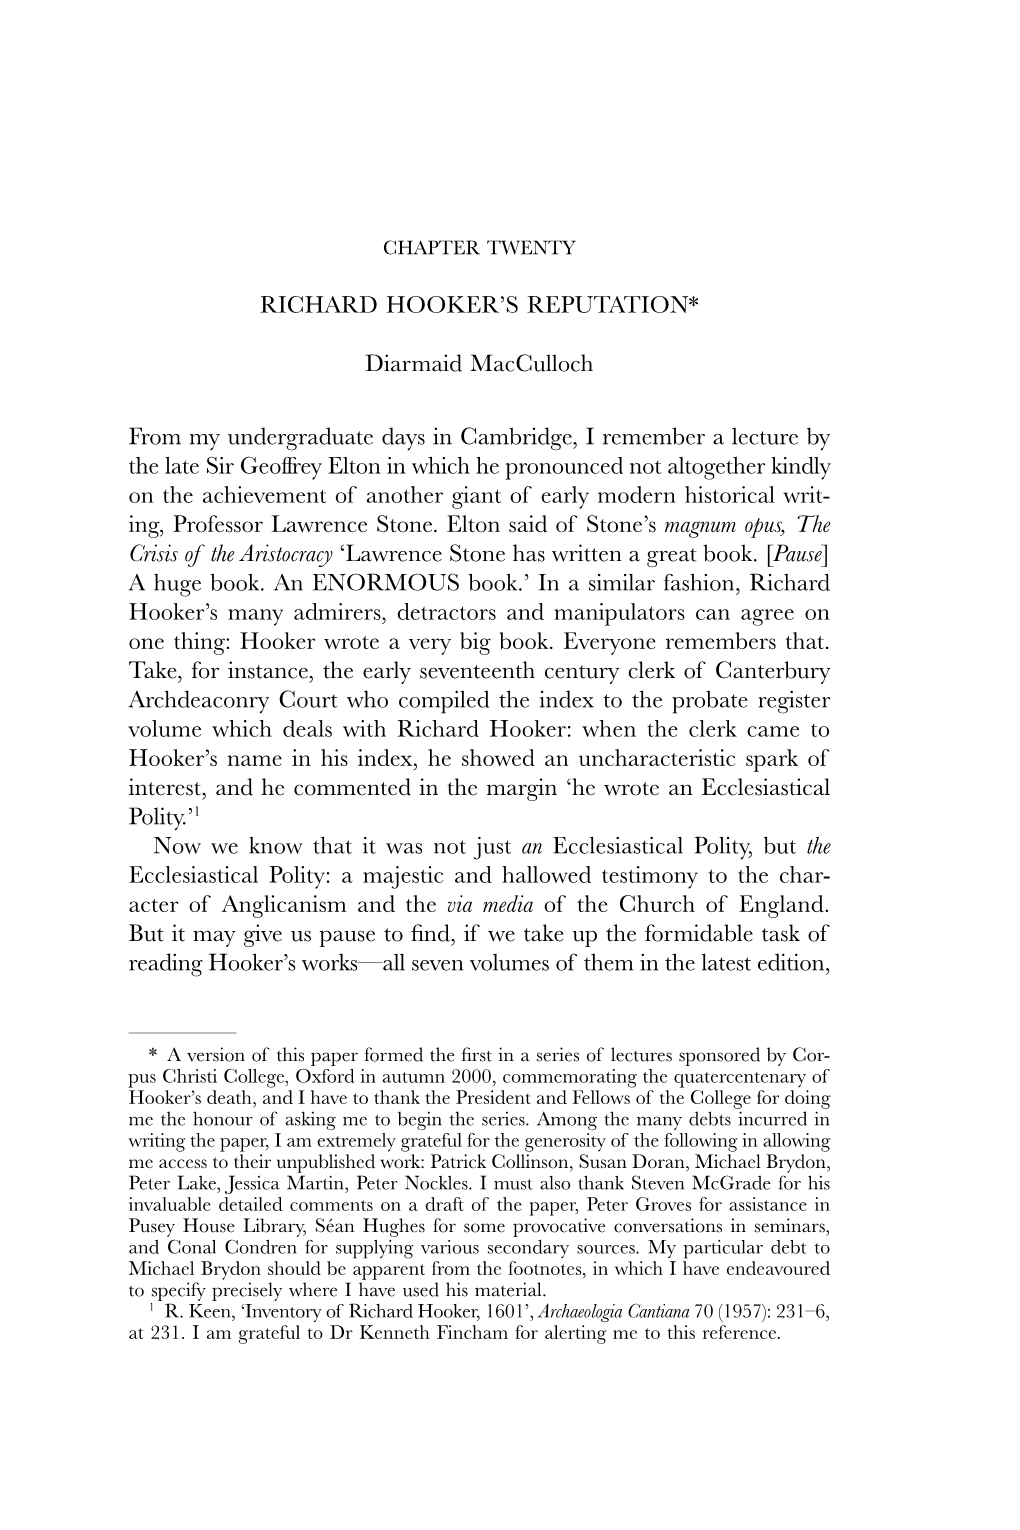 RICHARD HOOKER's REPUTATION* Diarmaid Macculloch from My Undergraduate Days in Cambridge, I Remember a Lecture by the Late